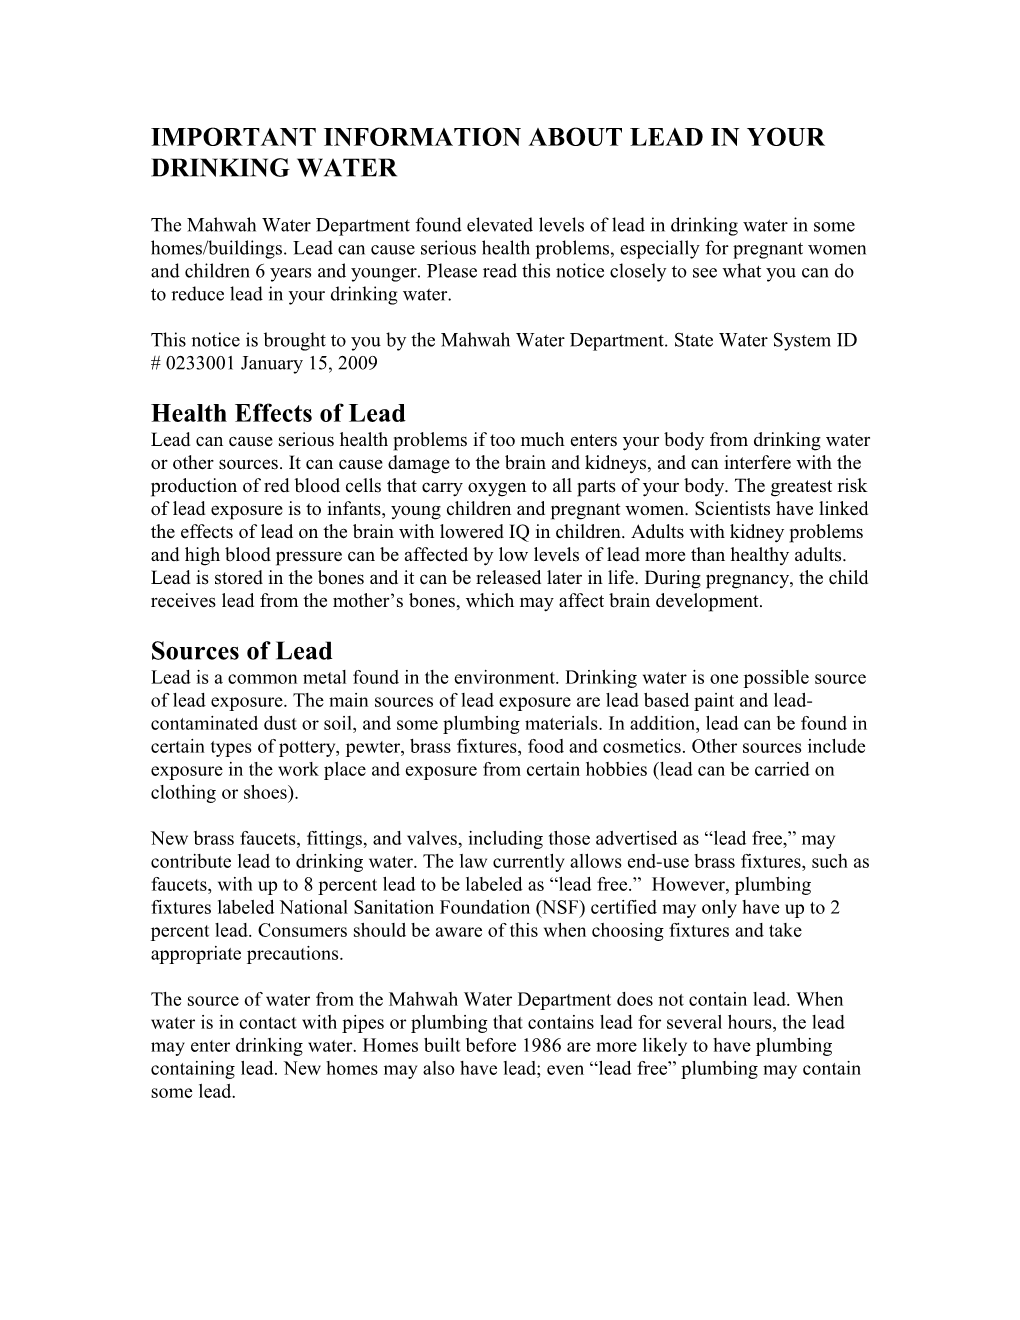 Important Information About Lead in Your Drinking Water